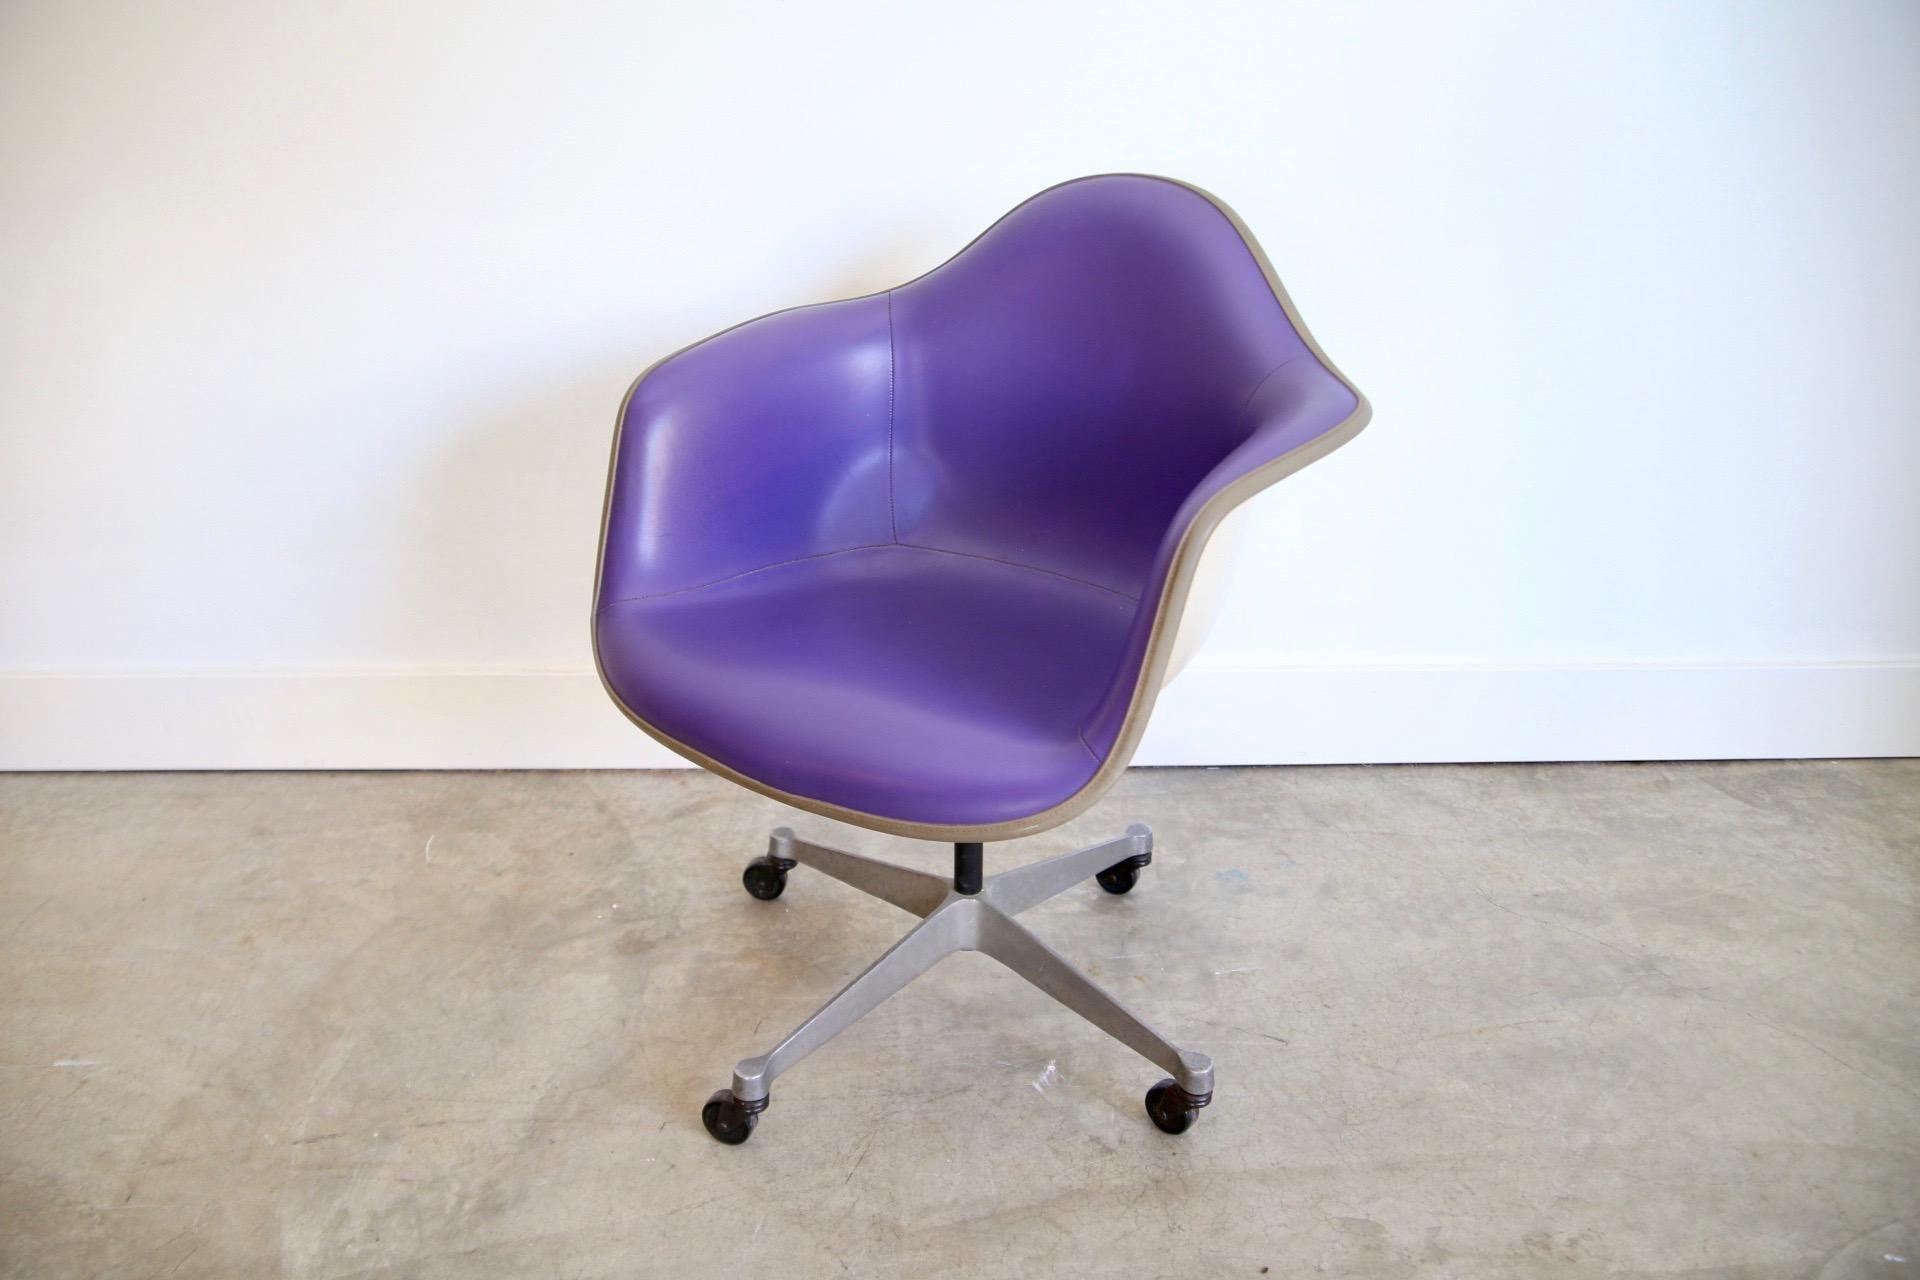 Designer: Eames
Manufacture: Herman Miller 
Period/style: Mid-Century Modern 
Country: US 
Date: 1950s.